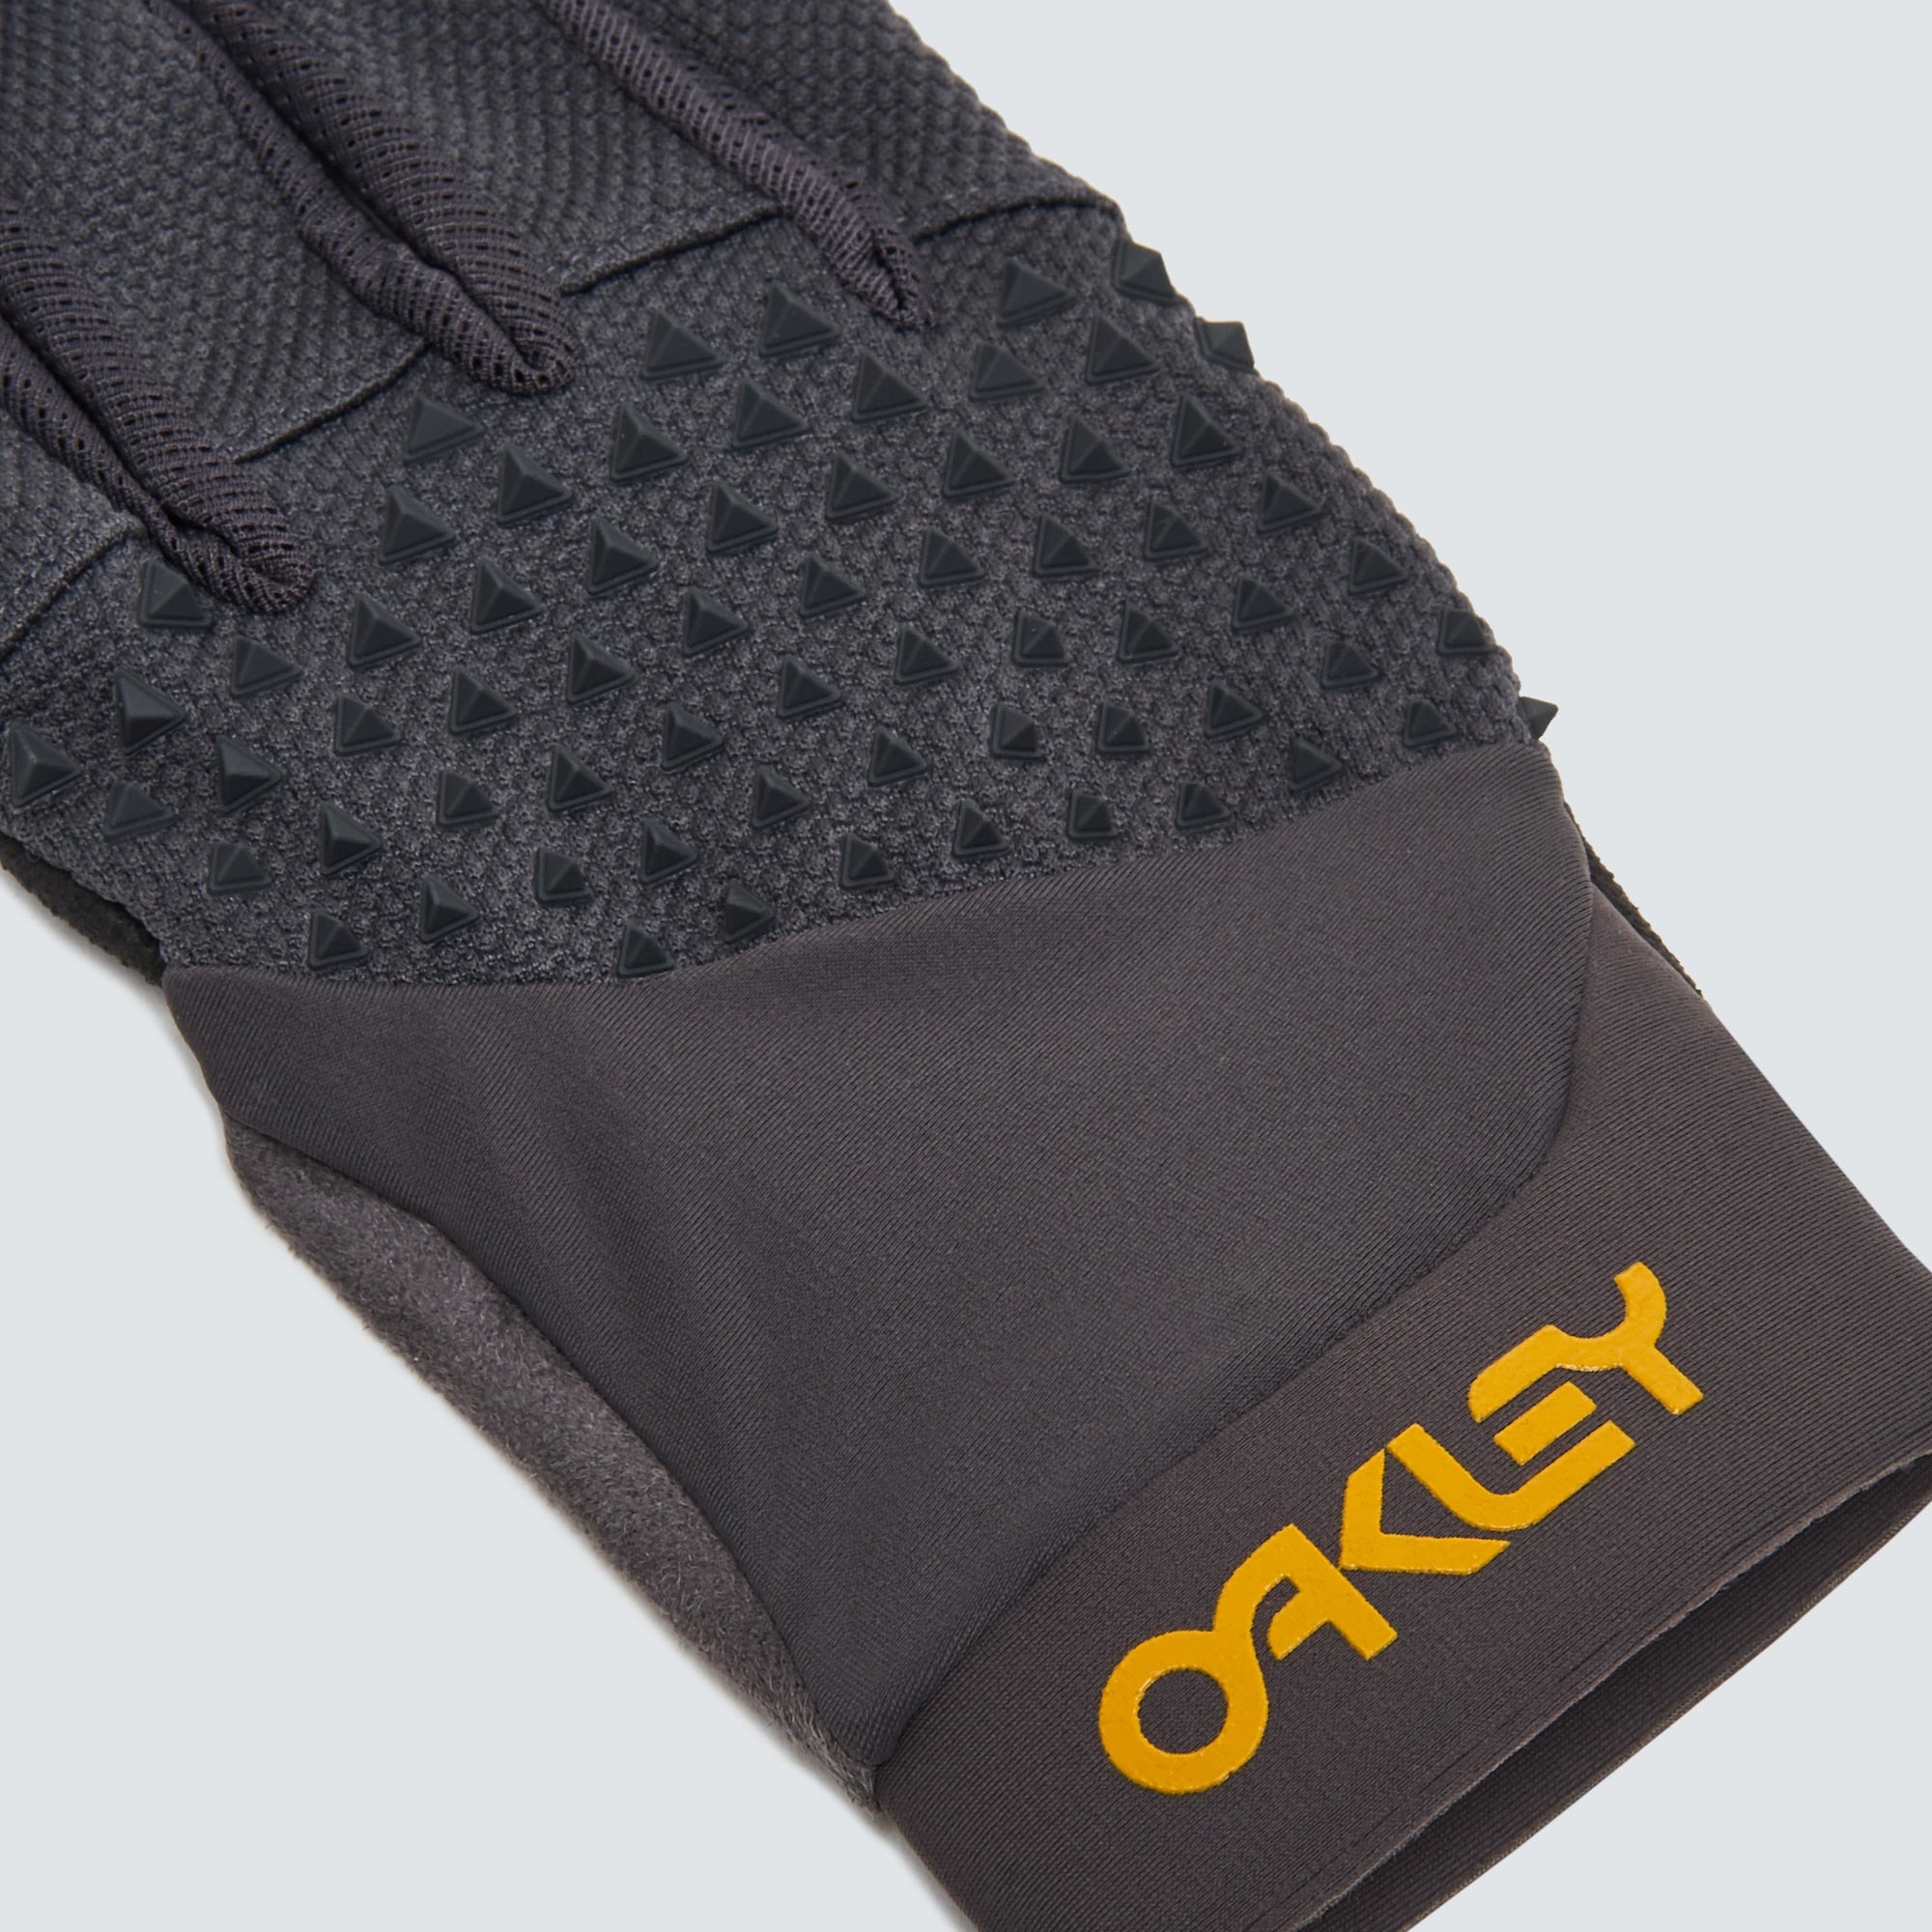 Oakley Drop In MTB Glove - Forged Iron